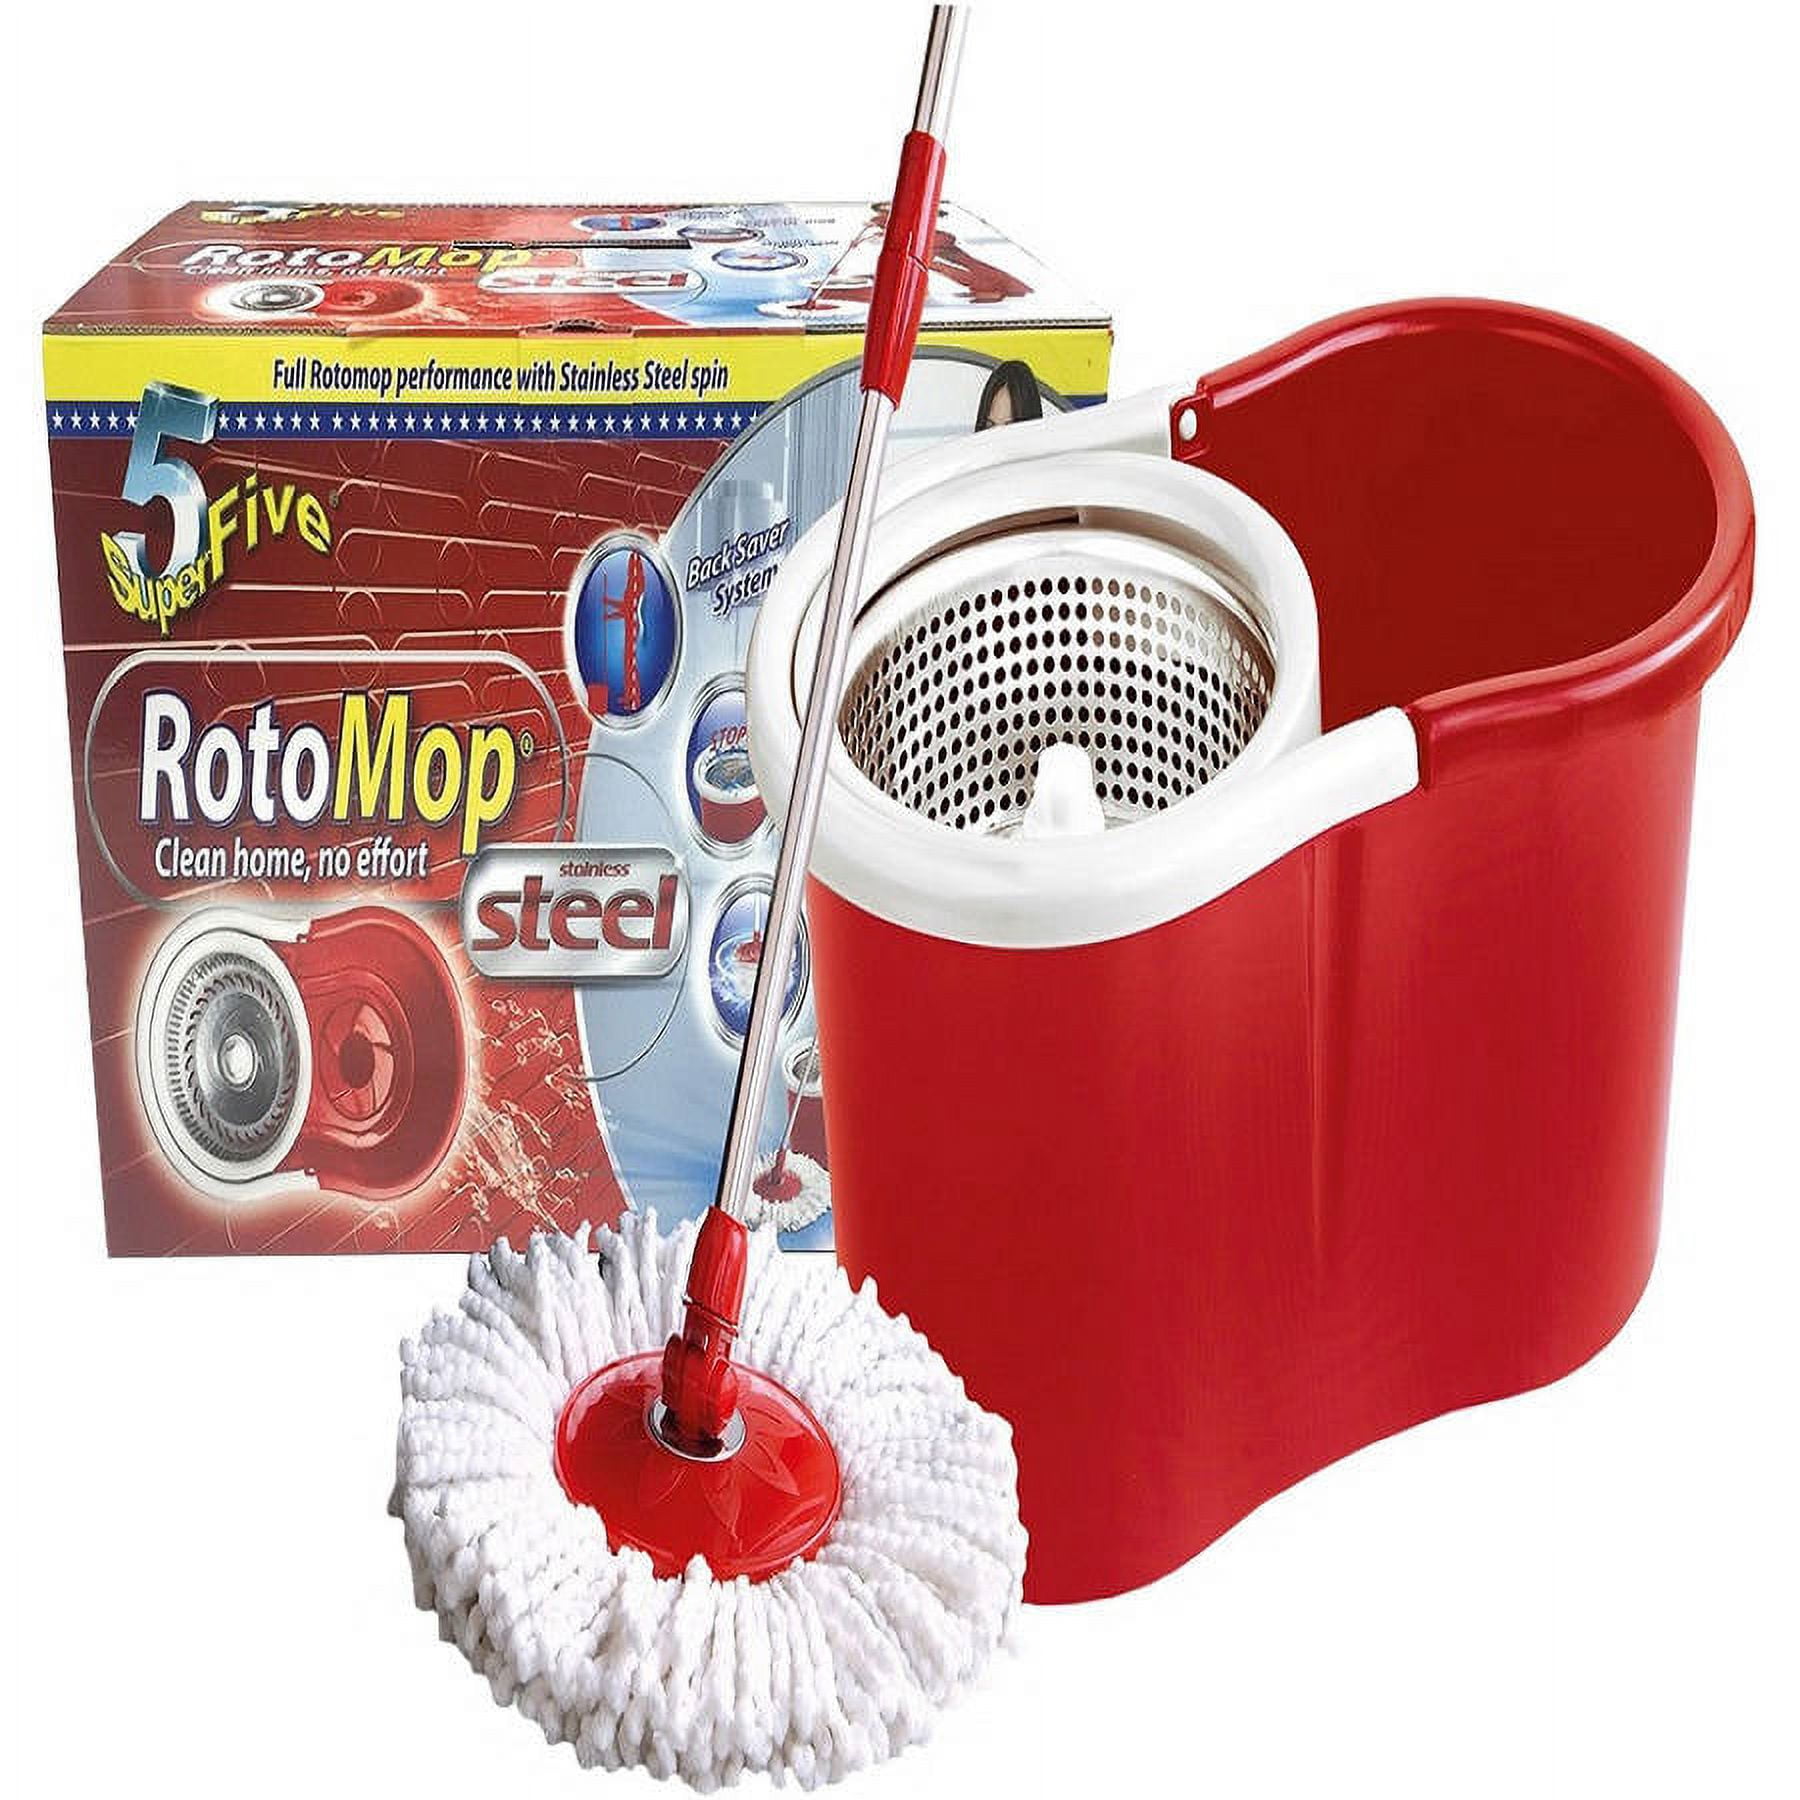 SuperFive RotoMop Mop with Stain & Steel Spin Bucket Kit, 3 pc